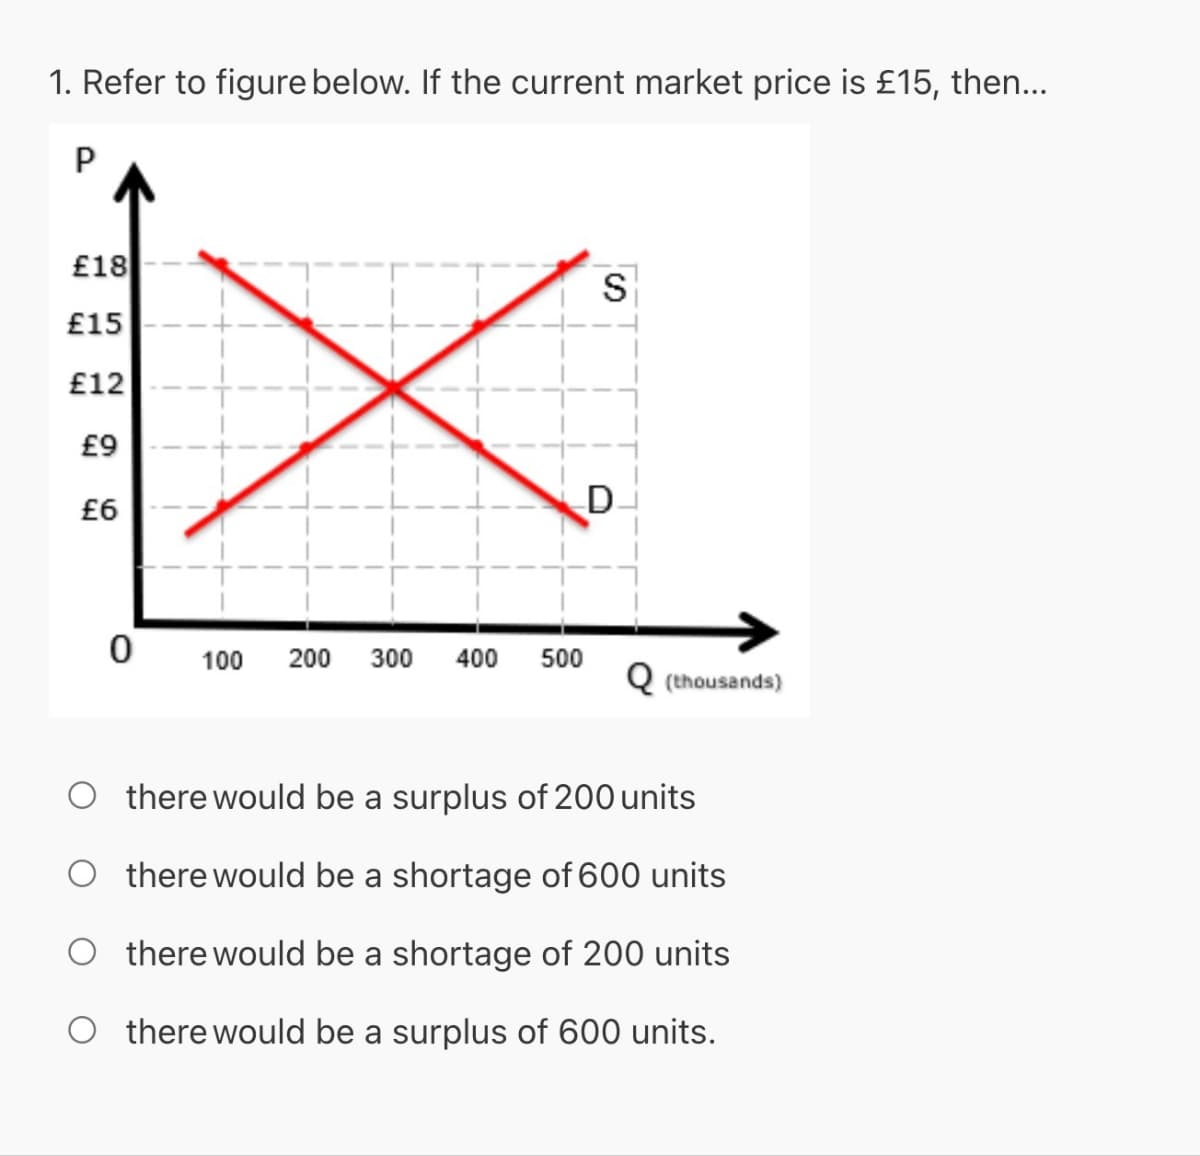 1. Refer to figure below. If the current market price is £15, then...
P
£18
£15
£12
£9
£6
0
100 200 300 400 500
S
D
Q (thousands)
Othere would be a surplus of 200 units
Othere would be a shortage of 600 units
Othere would be a shortage of 200 units
O there would be a surplus of 600 units.